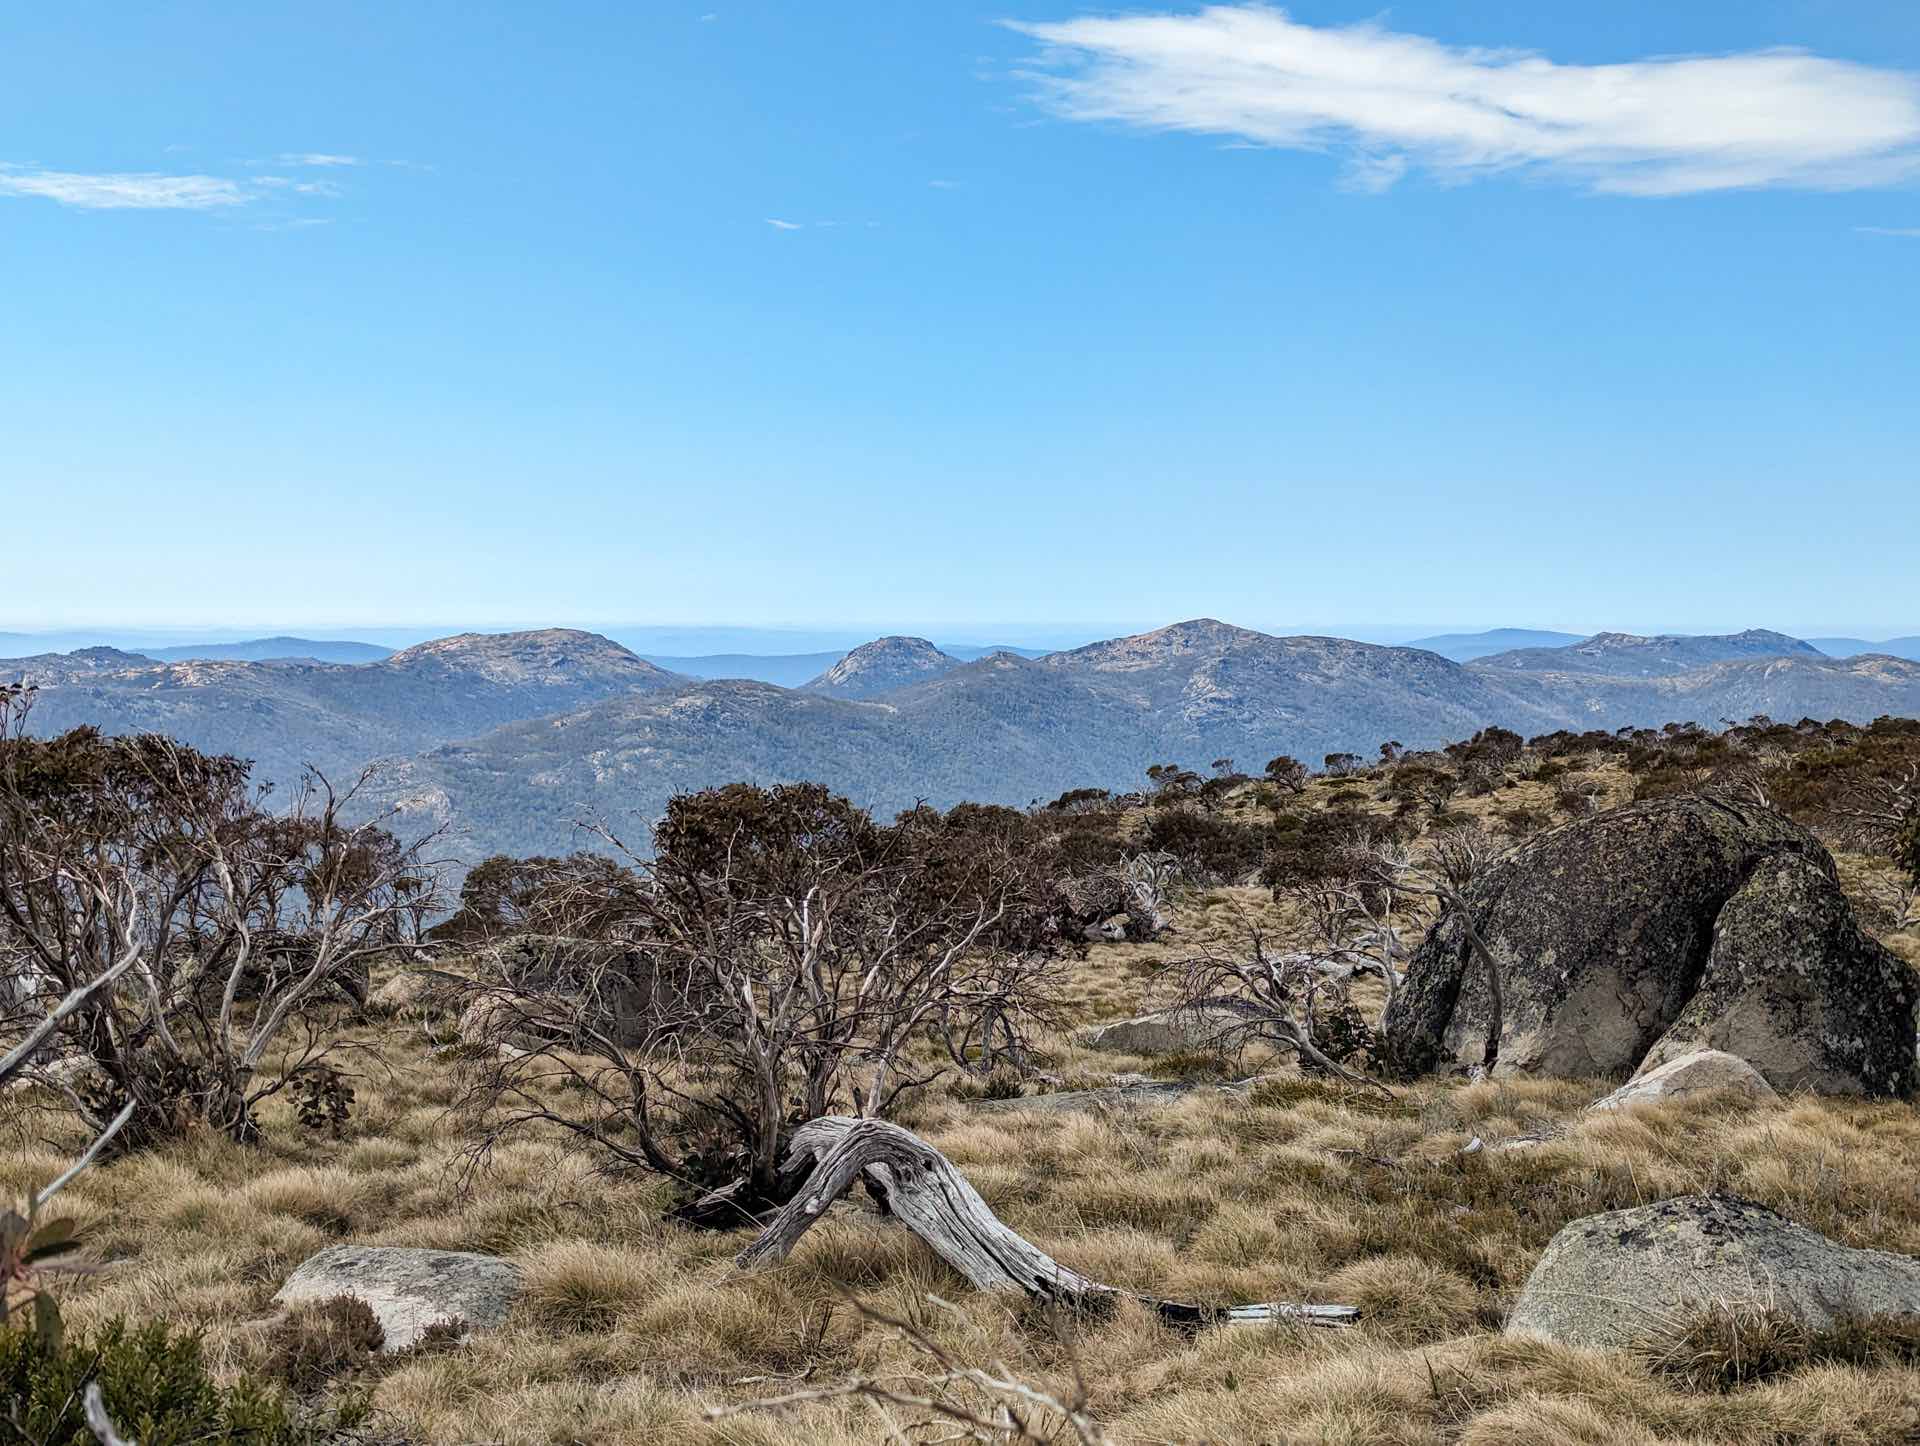 This Guy is Summiting the Highest Point in All 16 of Australia's States & Territories, william crompton, hiking, australian mountains, alphine bushland in the australian captial territory